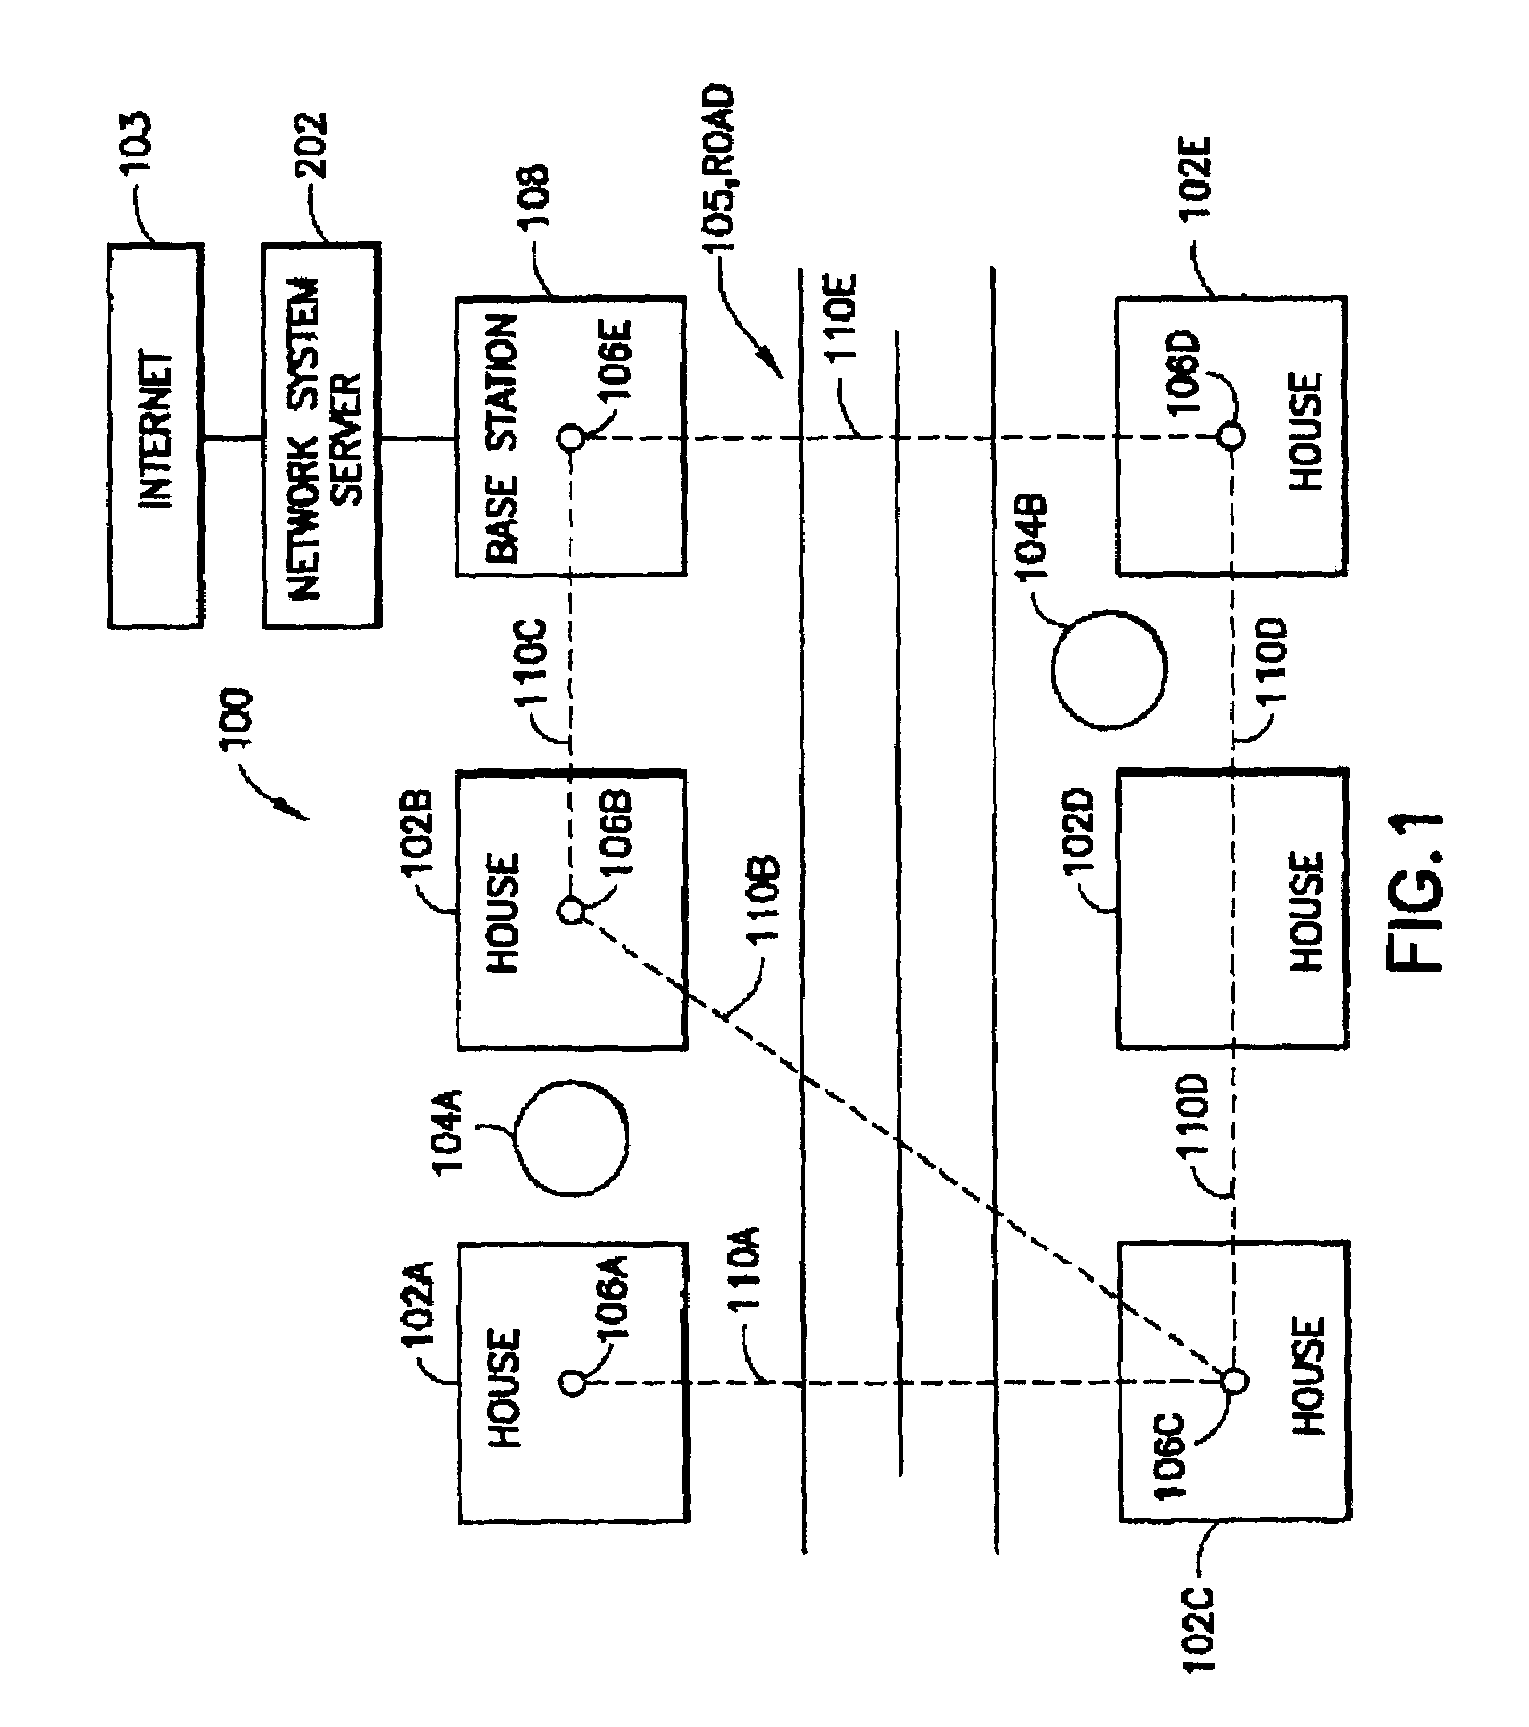 Method and system for automatically determining lines of sight between nodes